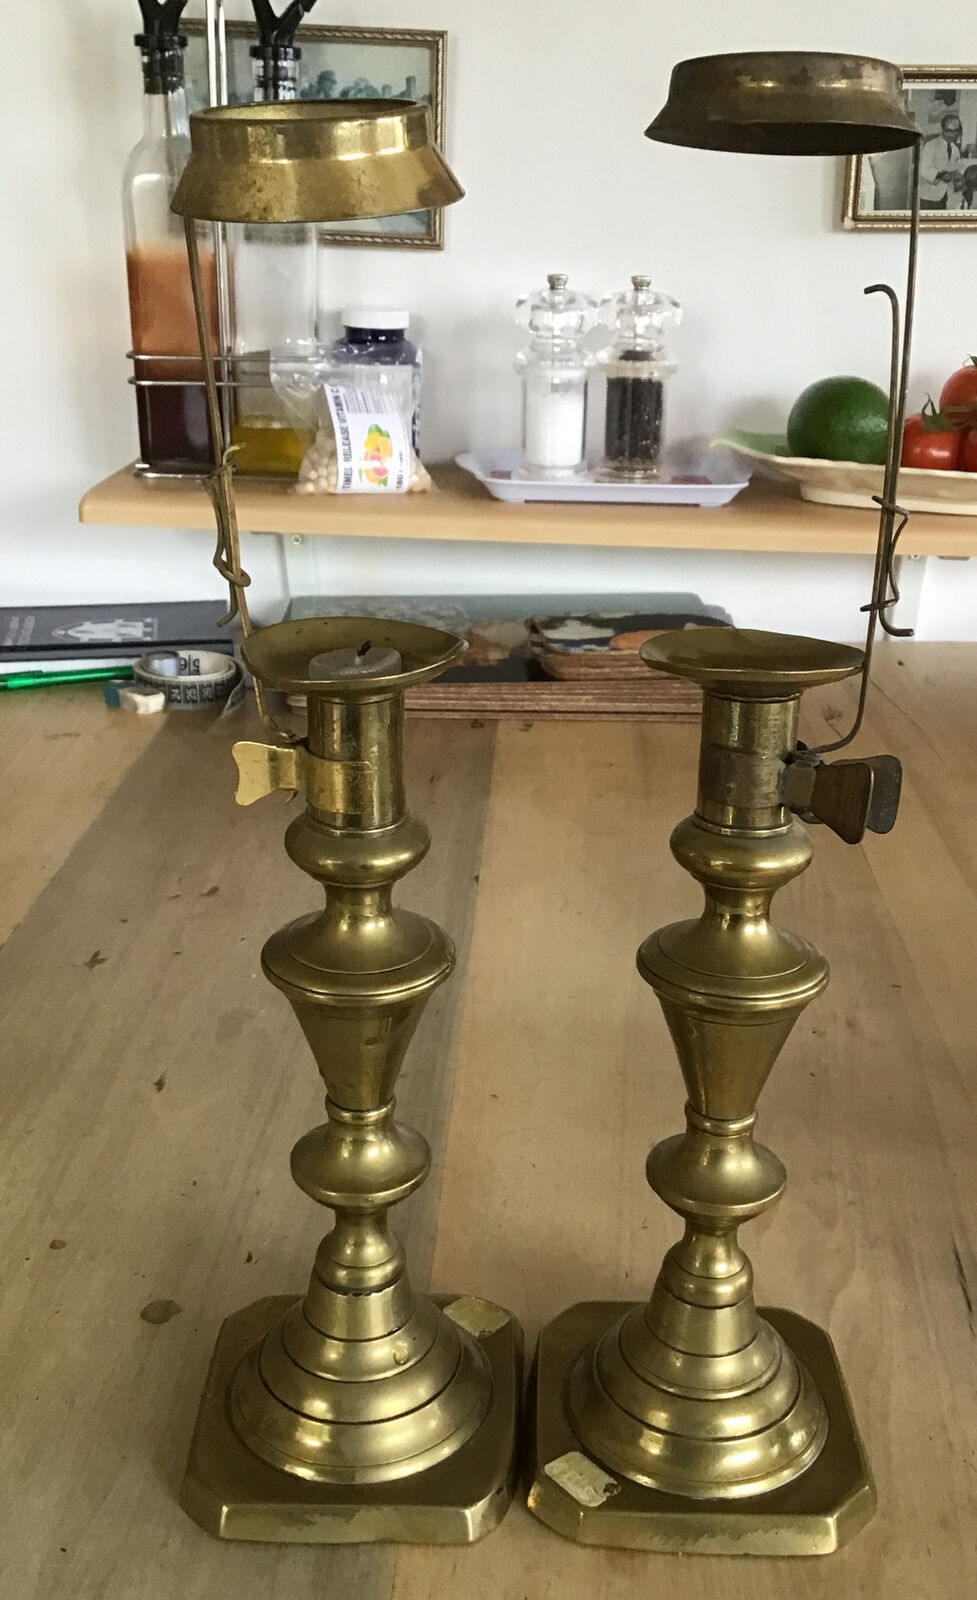 Antique Valuations: Pair Of Victorian Brass Candlesticks Tapering Stems With Attached Shade Holders